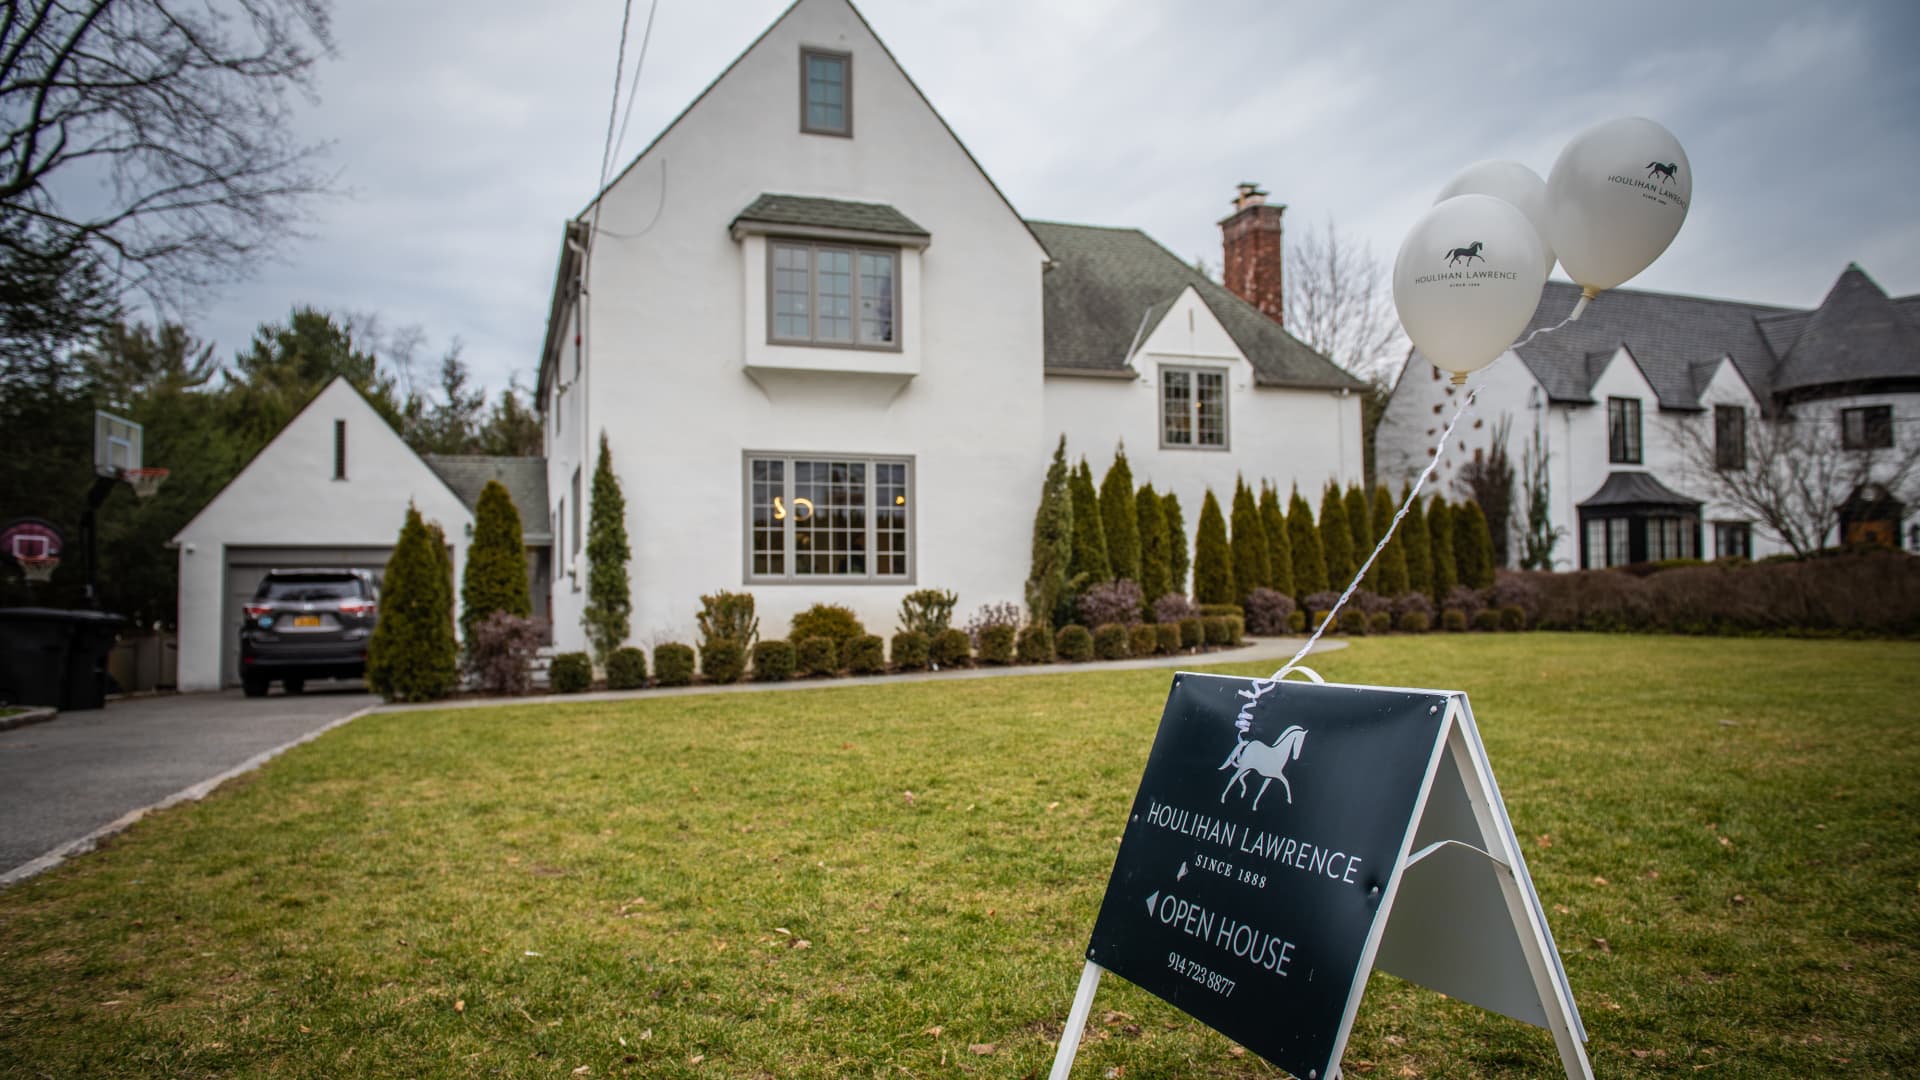 Prospective buyers attend an open house at a home for sale in Larchmont, New York, US, on Sunday, Jan. 22, 2023. 